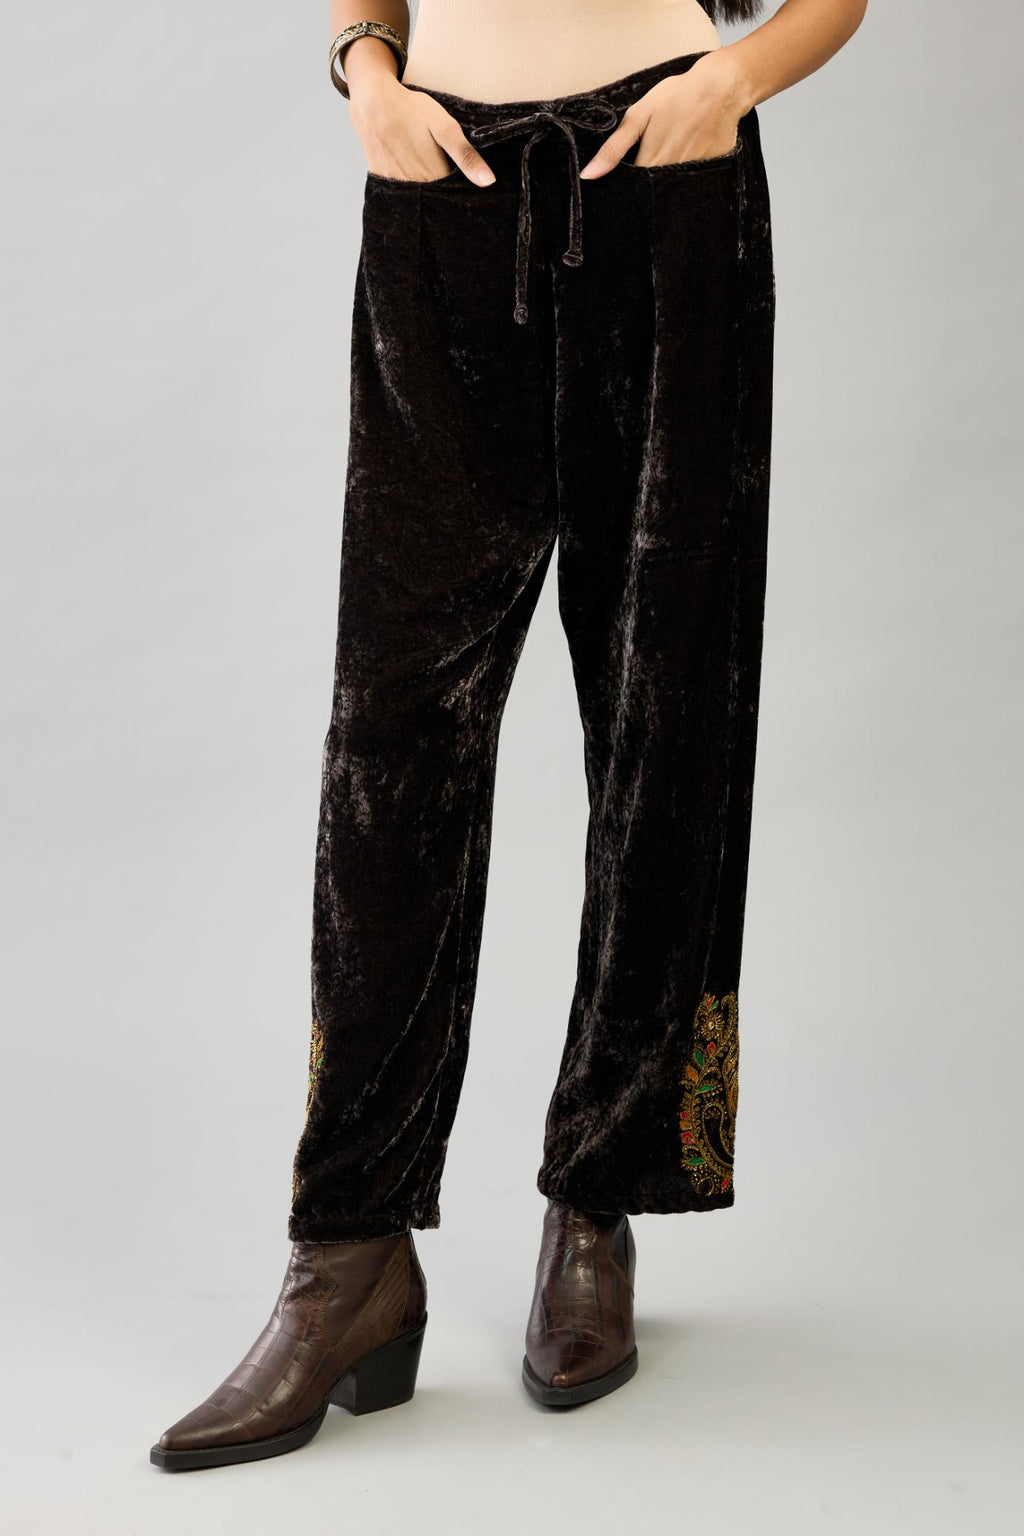 Grey silk velvet hand block printed straight pants with embroidered boota at sides, highlighted with sequins, beads and zari work.